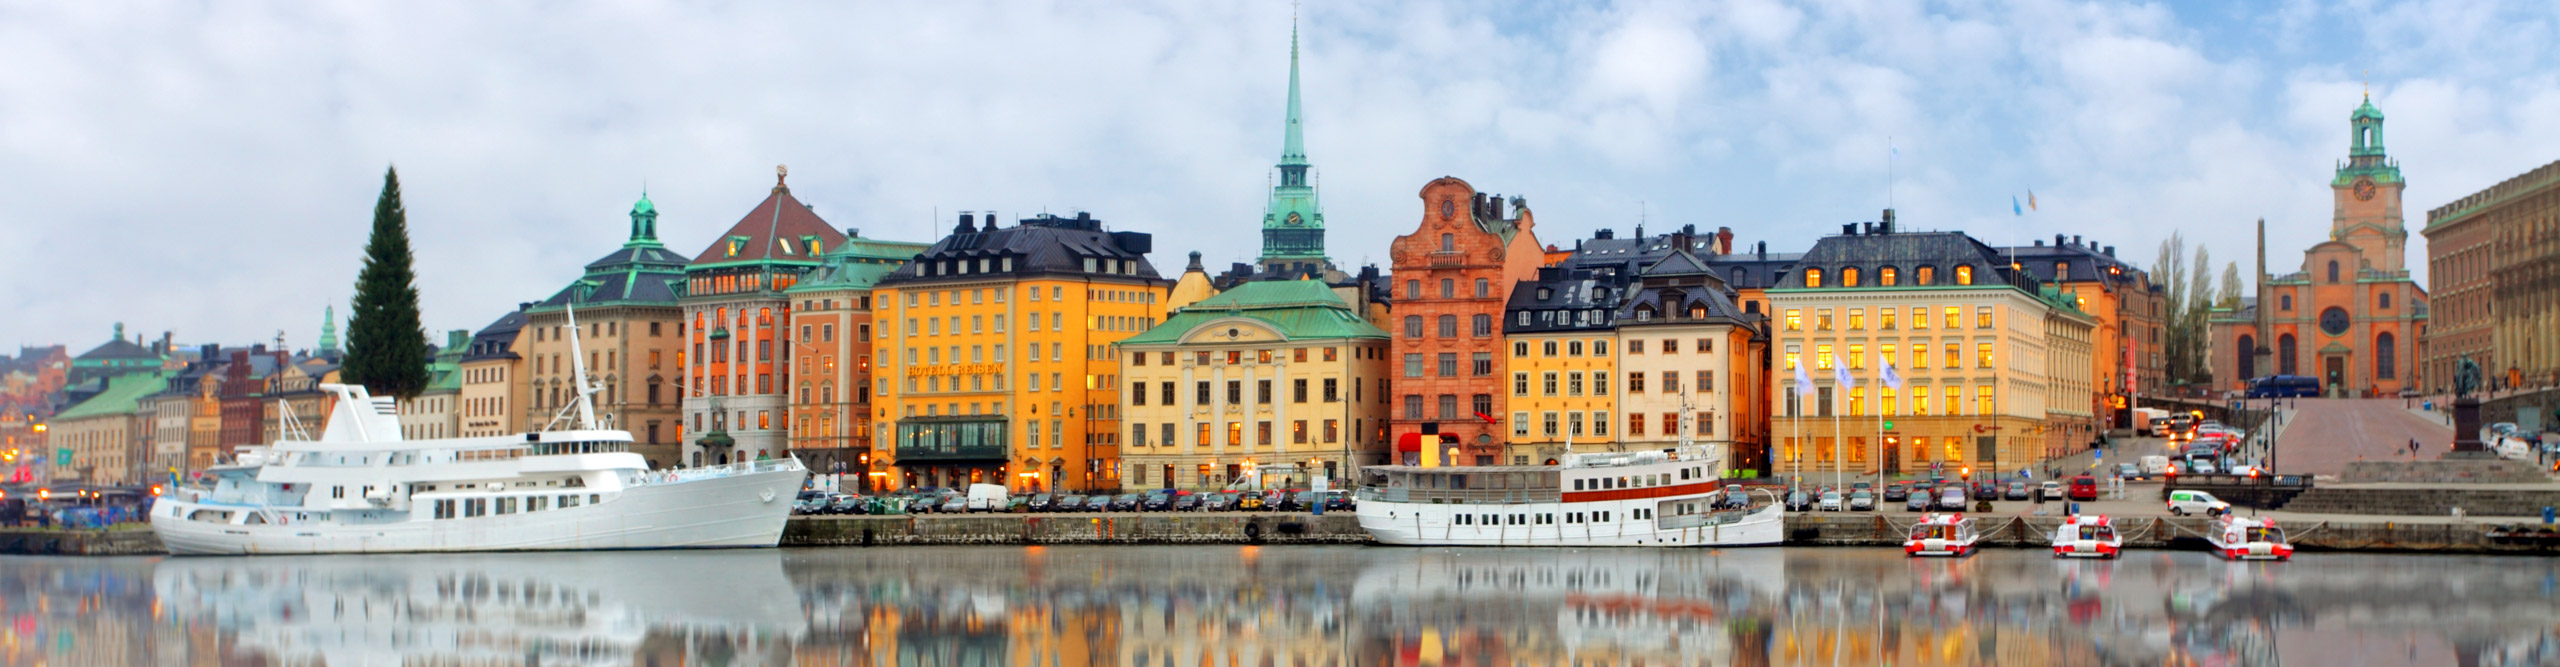 Scenic panorama of the Old Town pier architecture in Stockholm, Sweden, on a cloudy